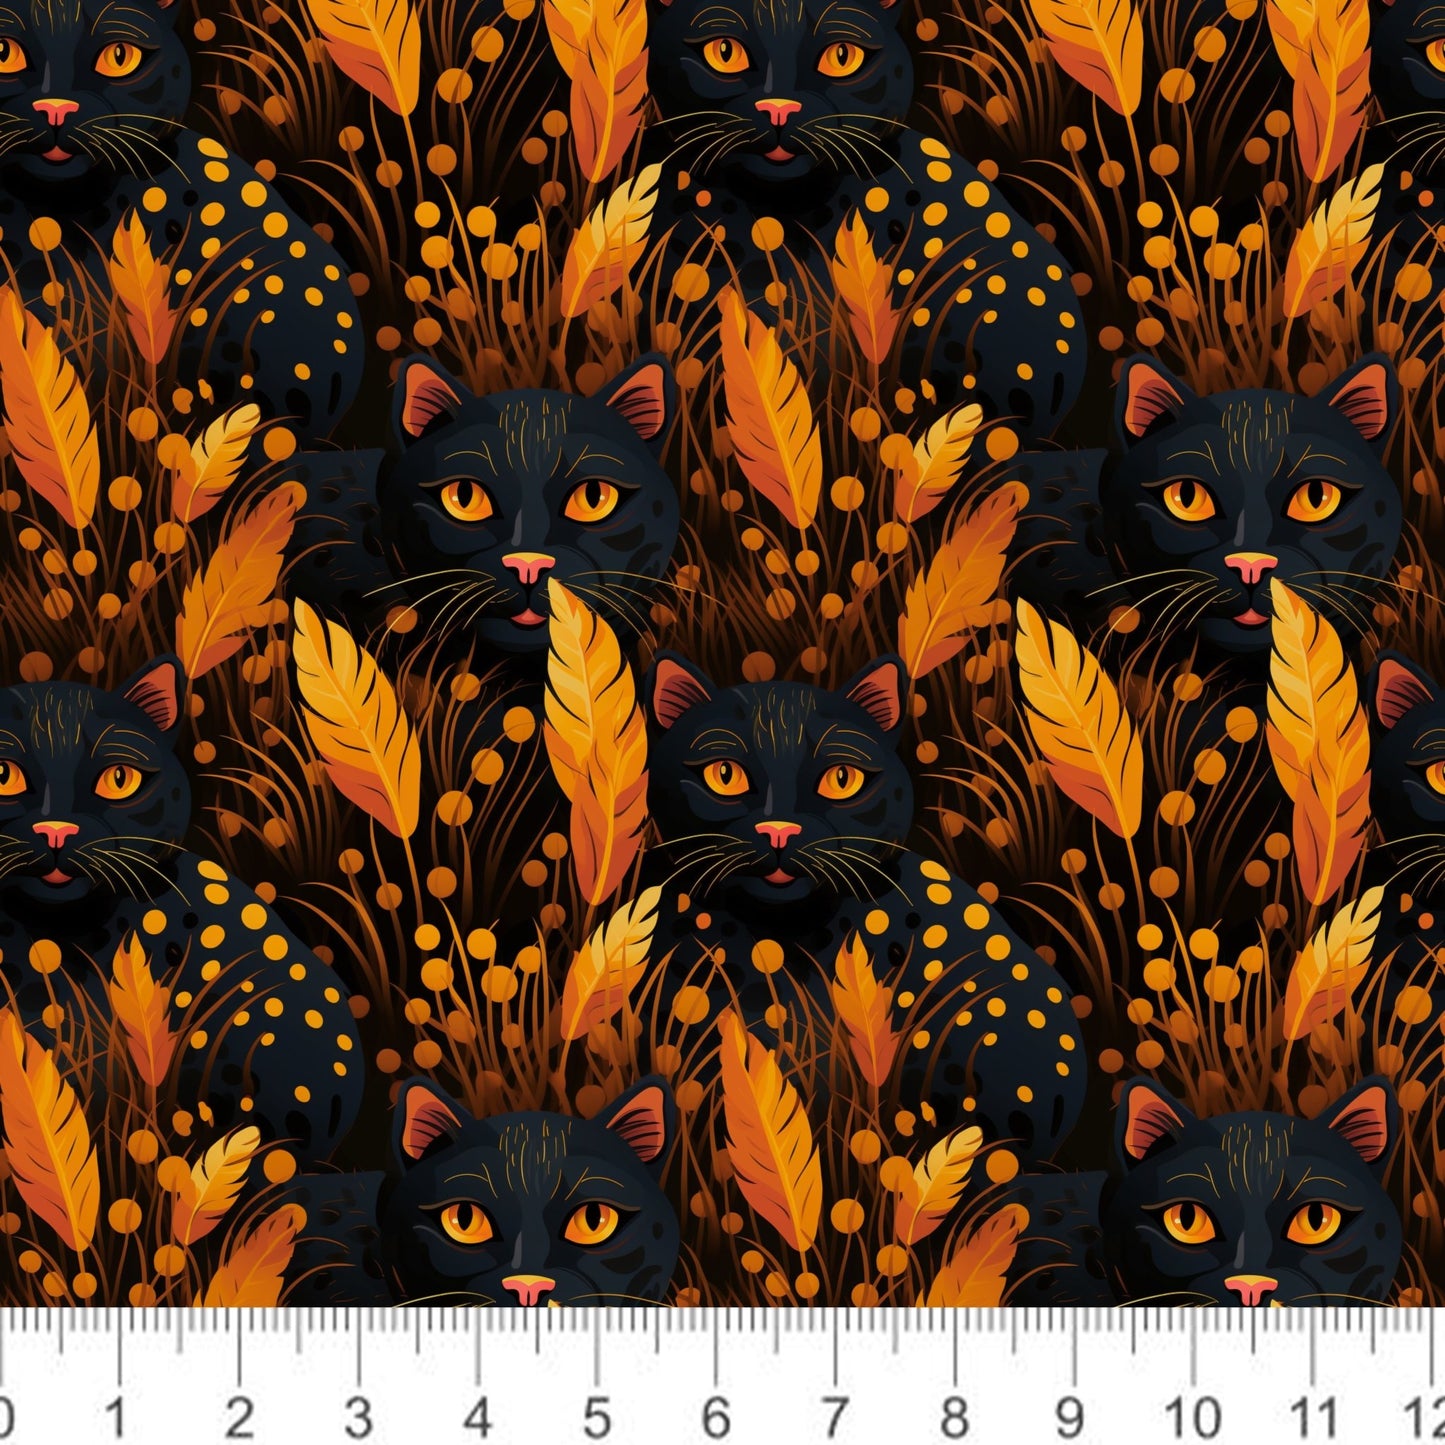 Autumn Black Cats - Little Rhody Sewing Co.